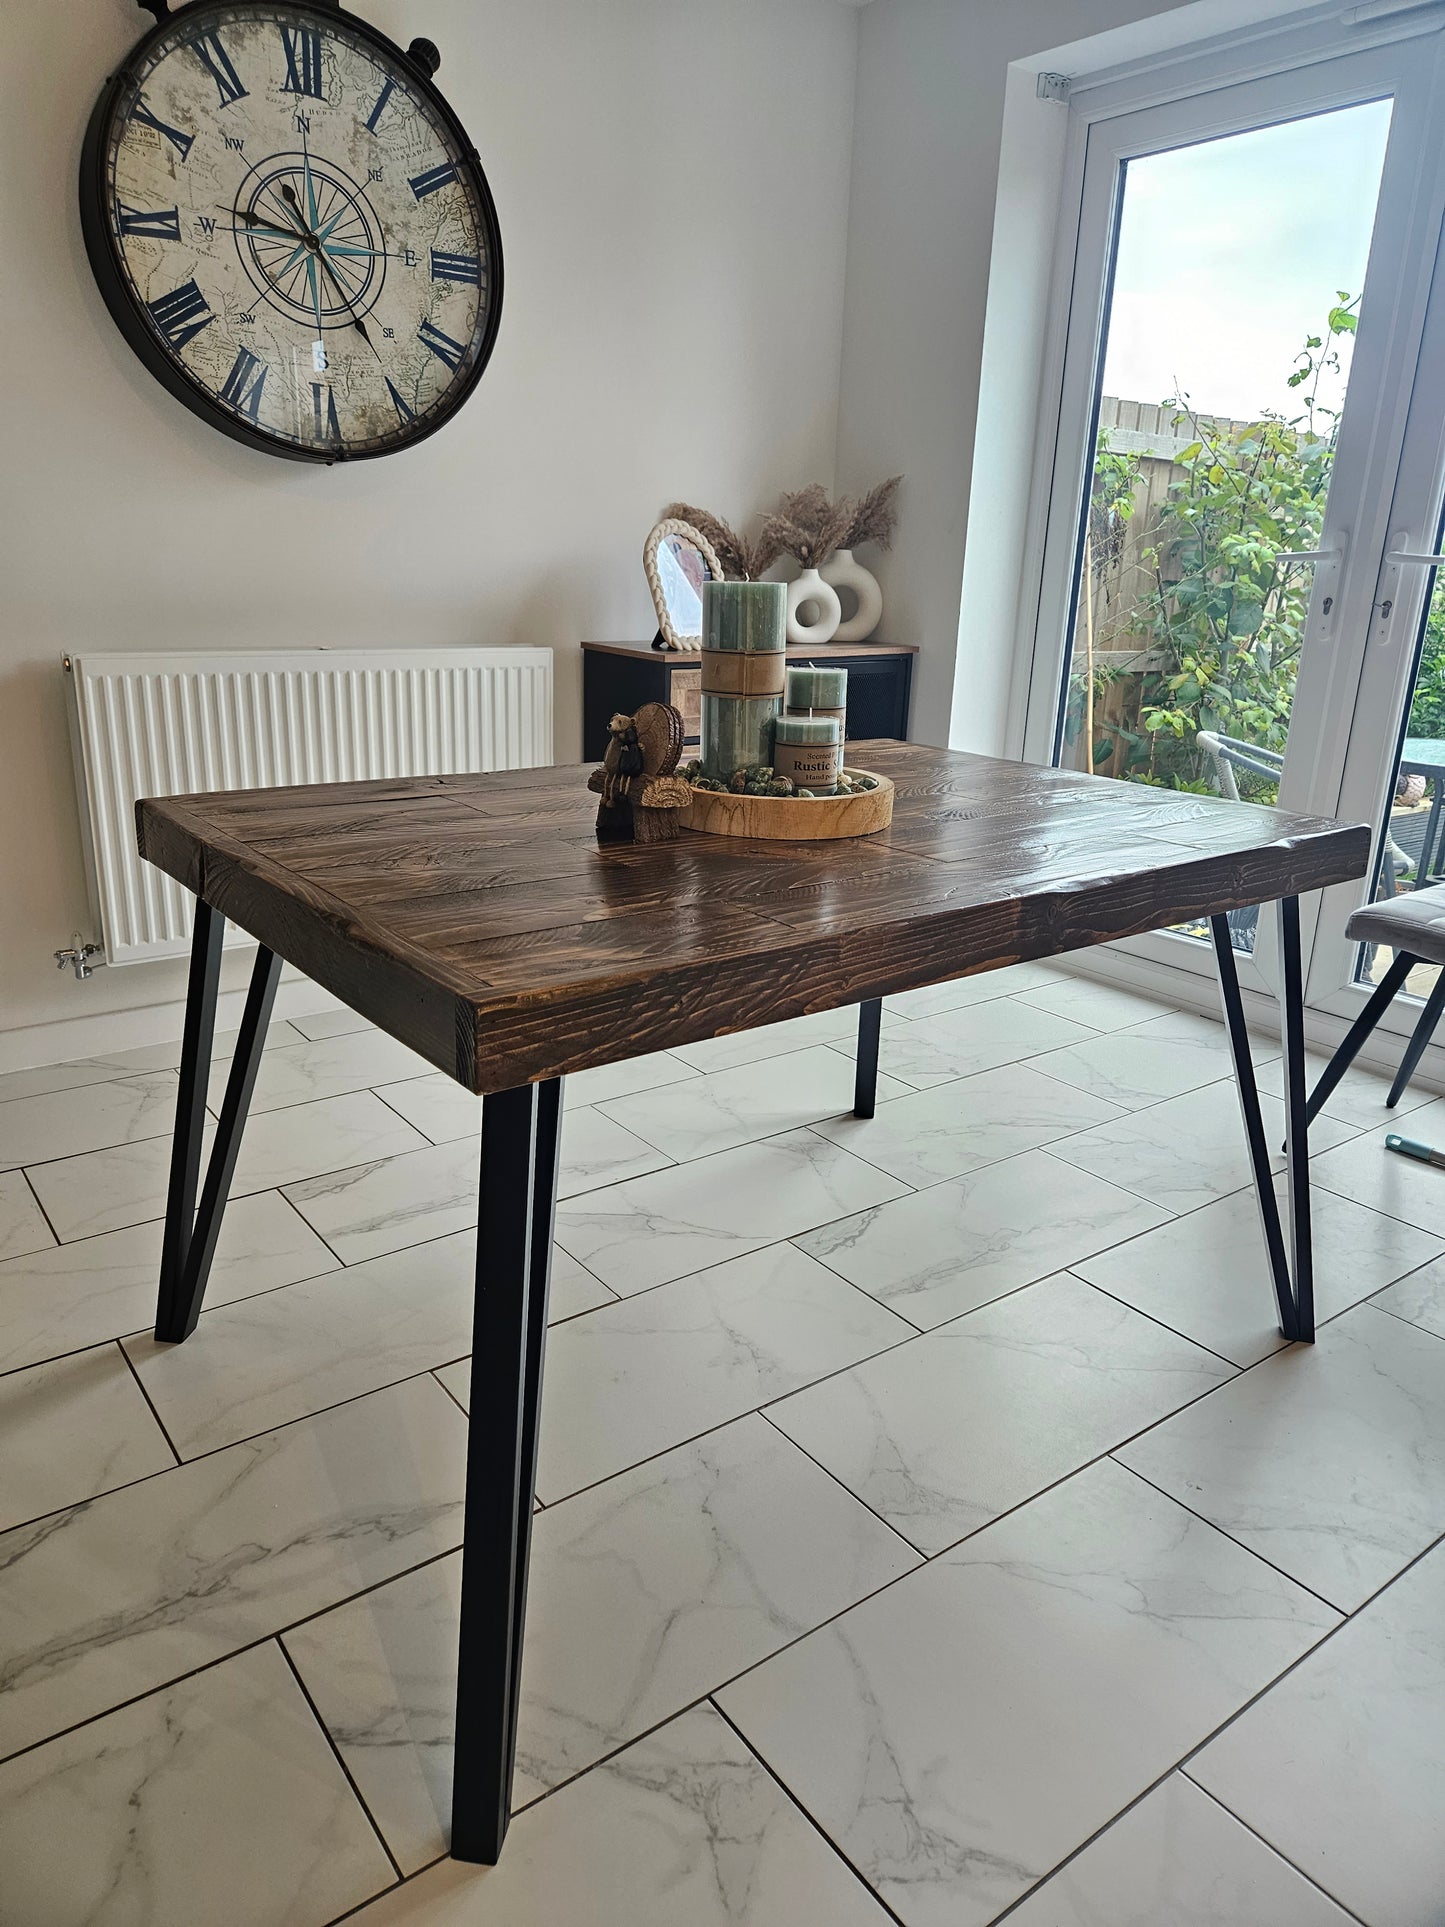 Hairpin style Dining Table with 4 chairs (grey)